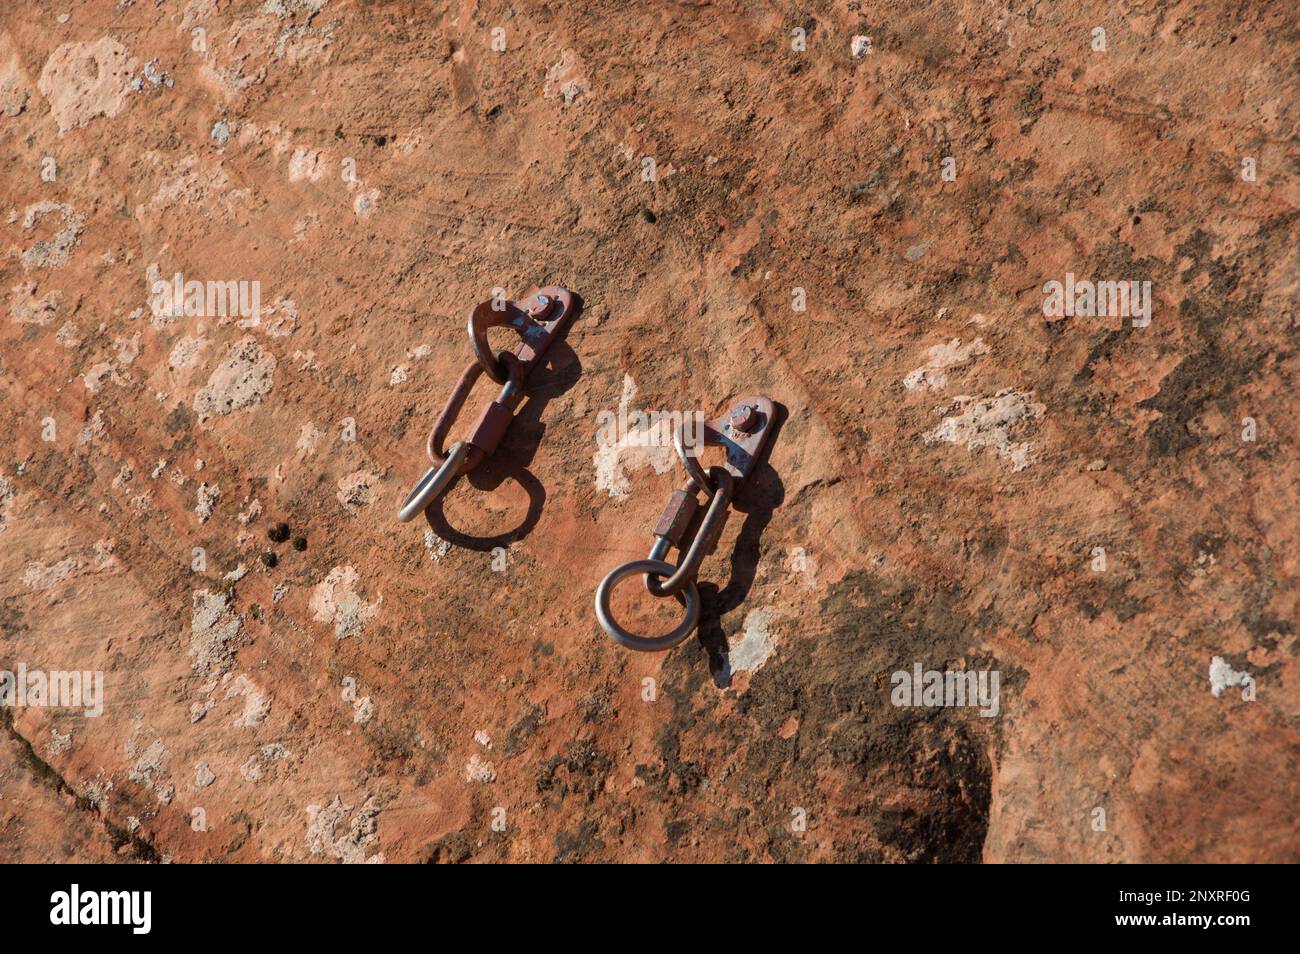 rock climbing rappel anchors placed in sandstone Stock Photo